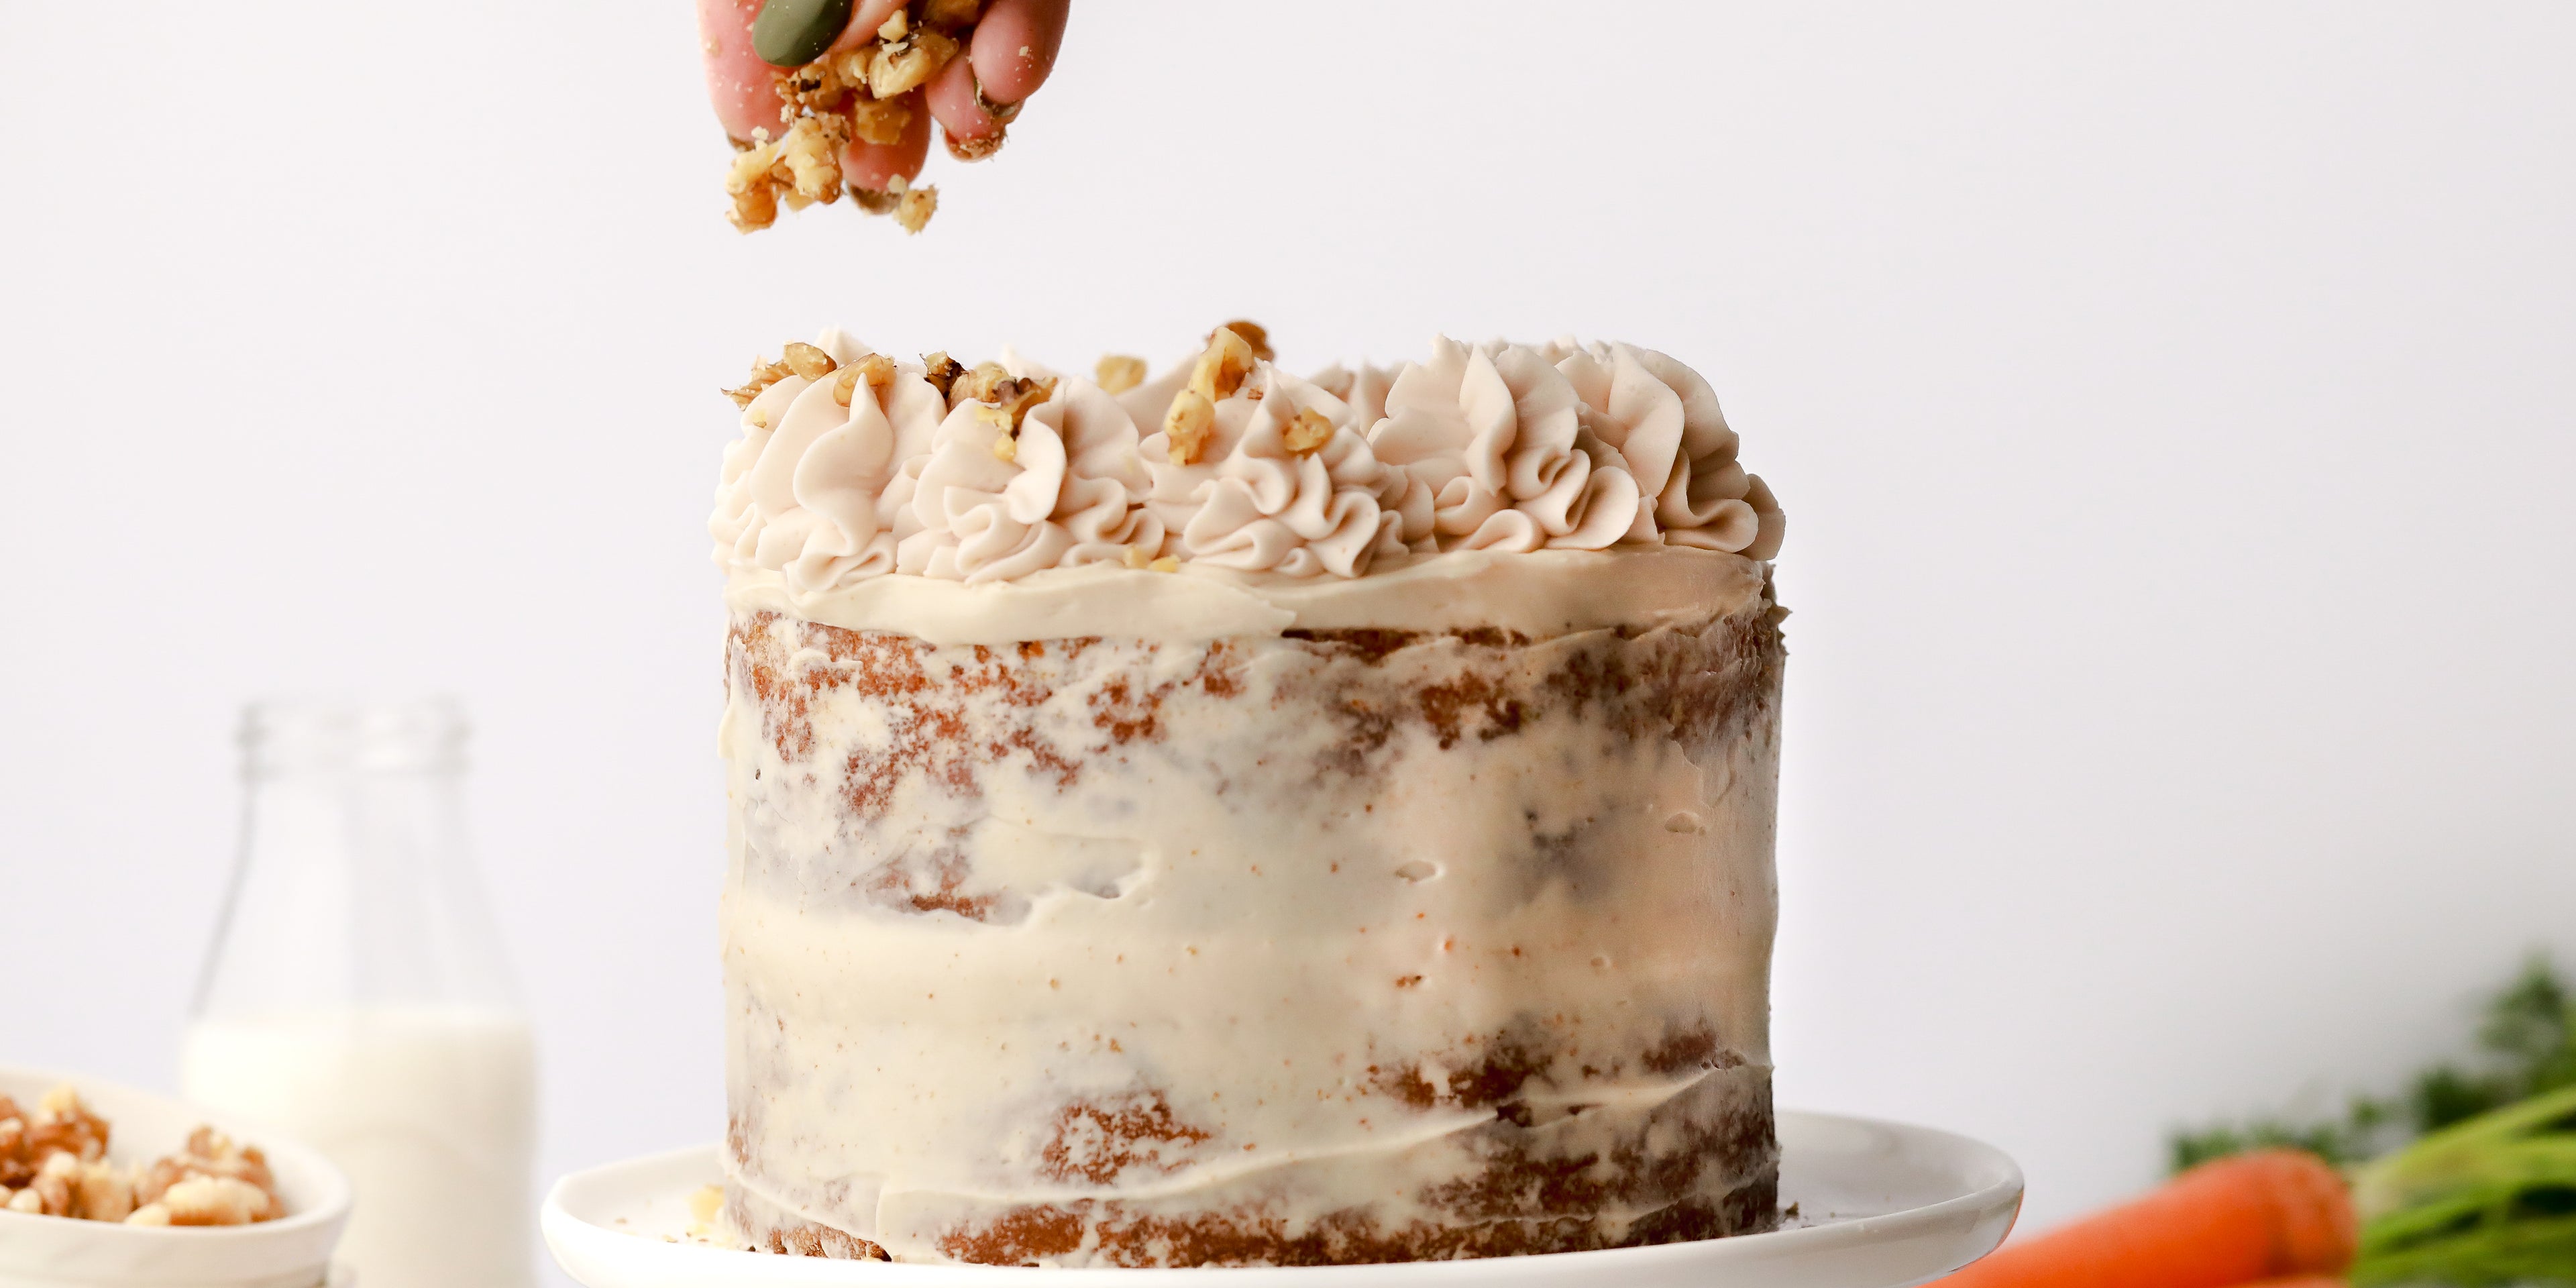 Hand sprinkling nuts on top of a carrot cake